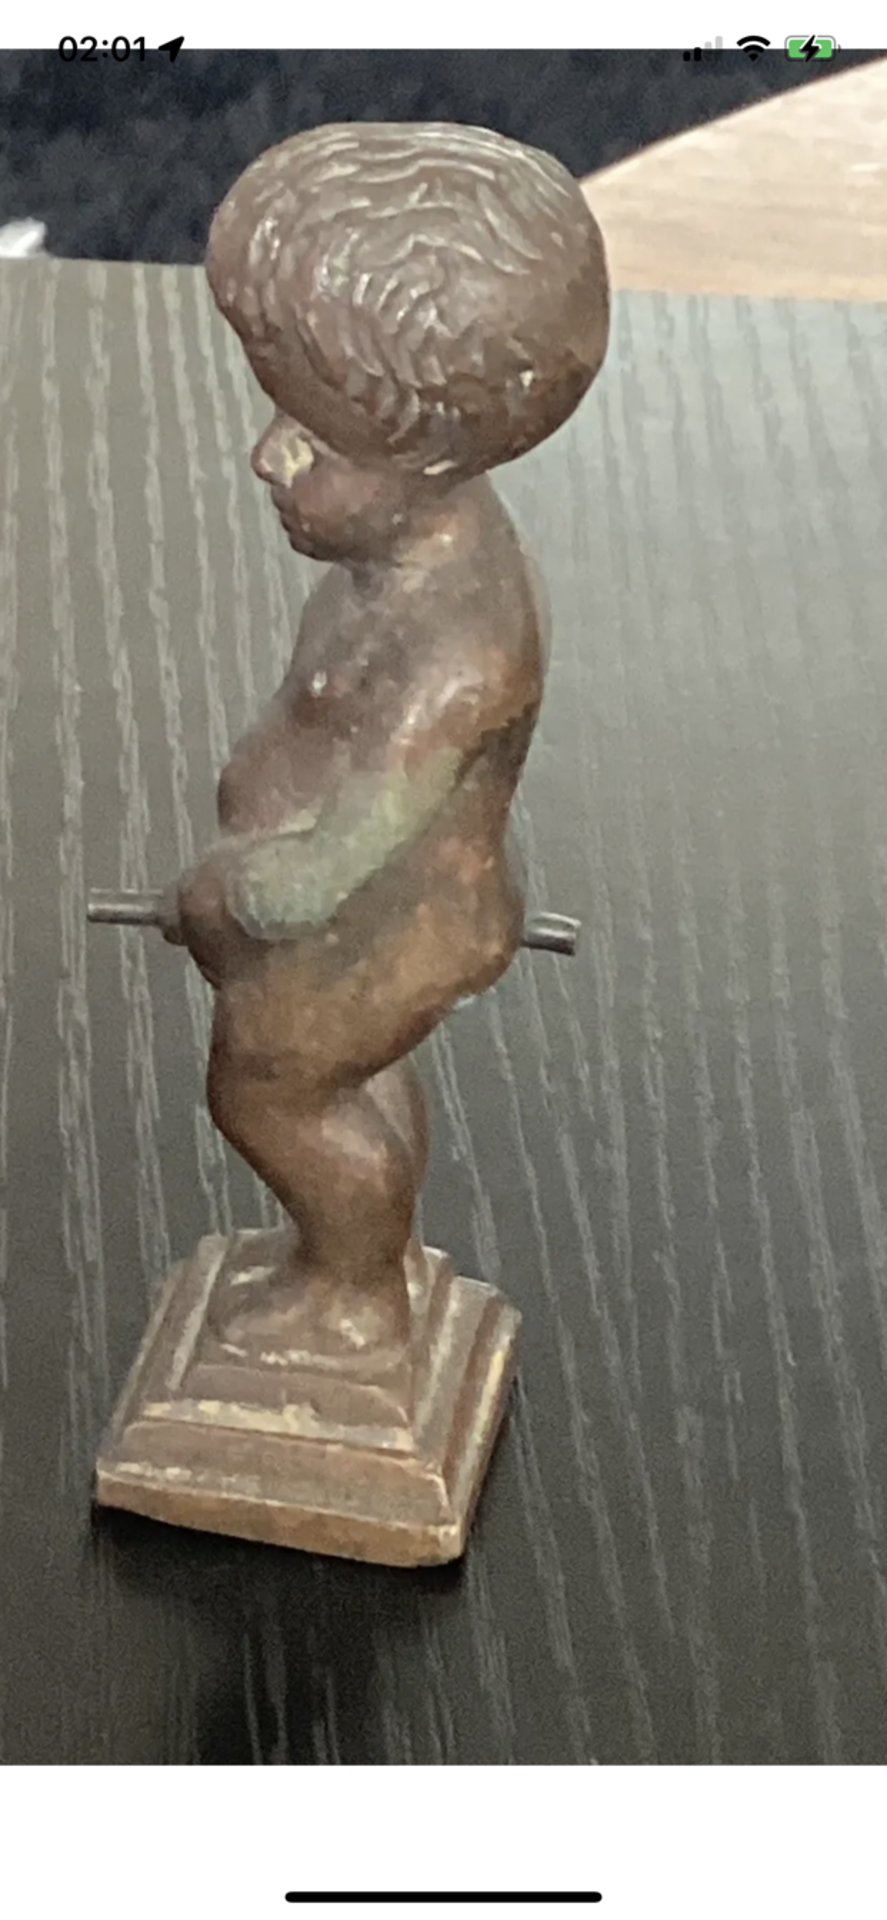 SMASLL ANTIQUE BRONZE CHERUB WITH SPOUT - Image 5 of 7